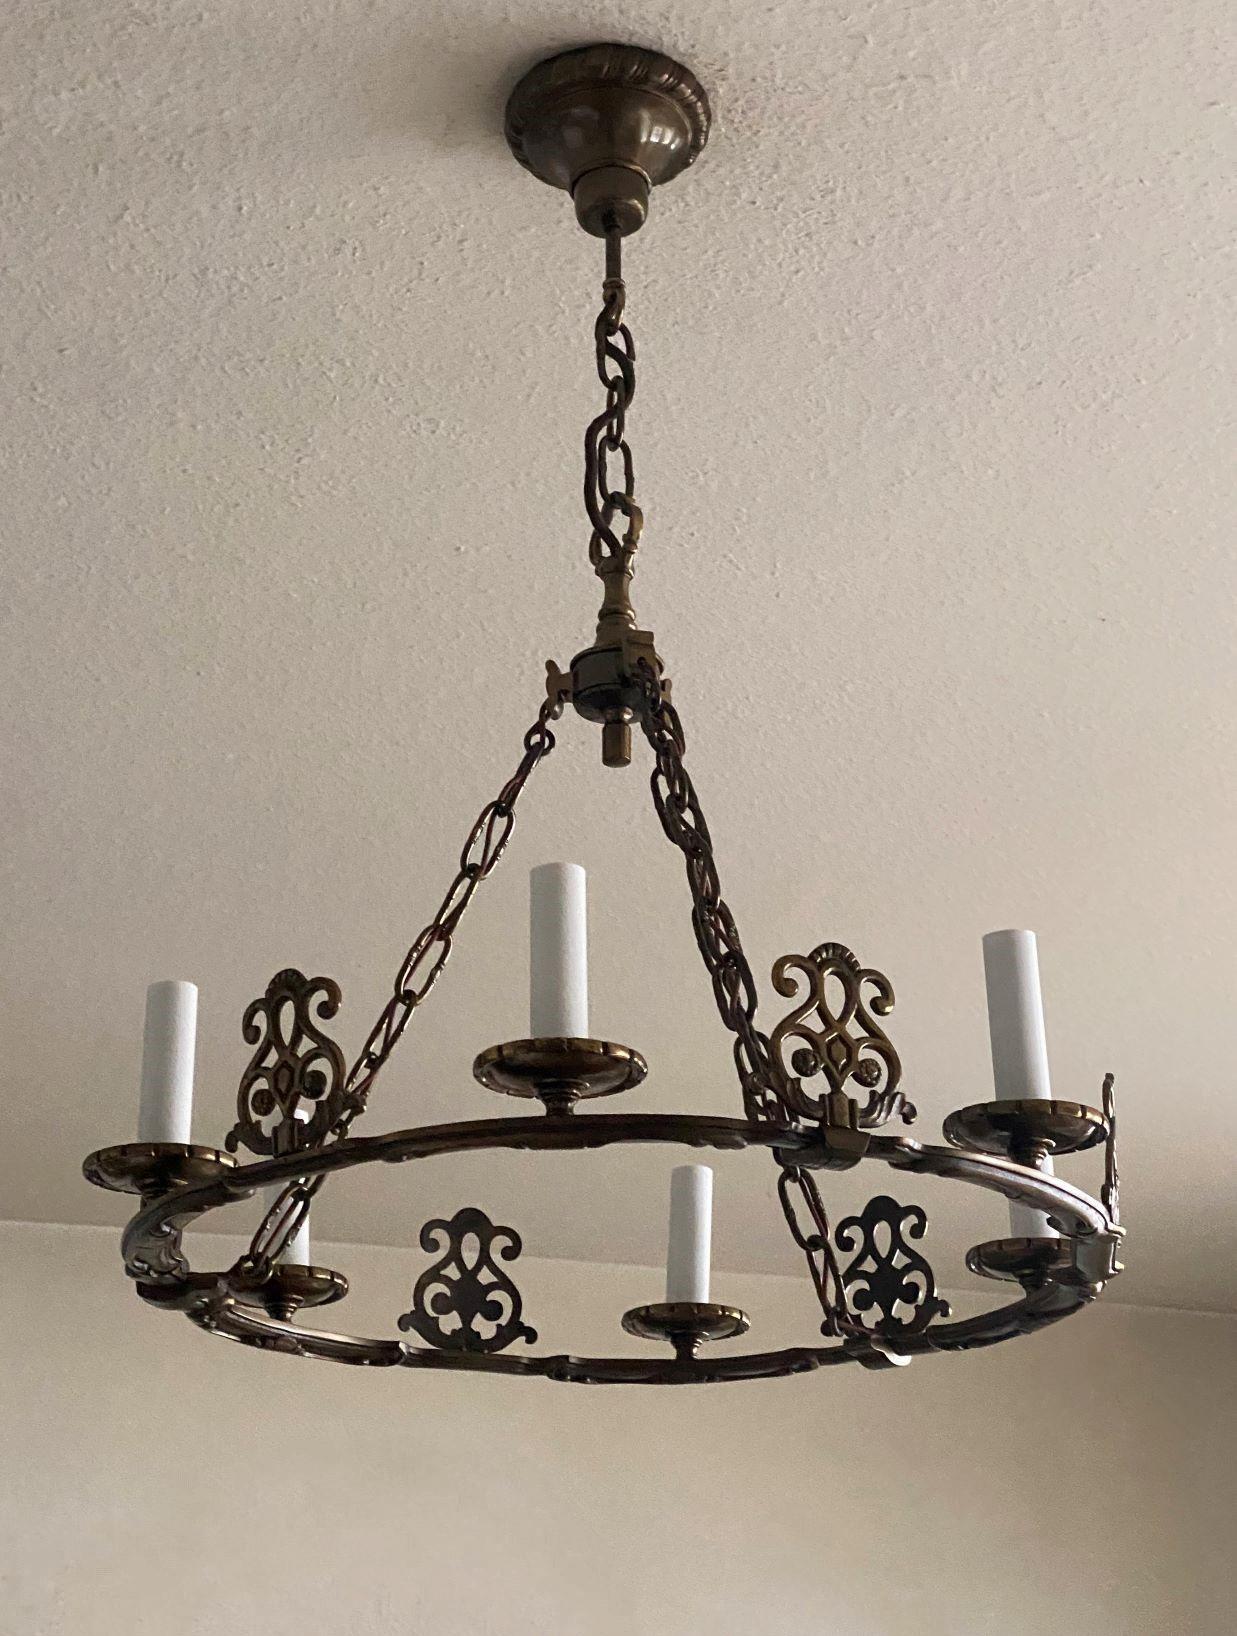 A very elegant ring shapped chandelier of old bronze in country house style, France, 1930s. Large ring supporting six candelabra lights, suspended by three bronze chains conecting to a large ceiling canopy.
In very good condition, no damages,